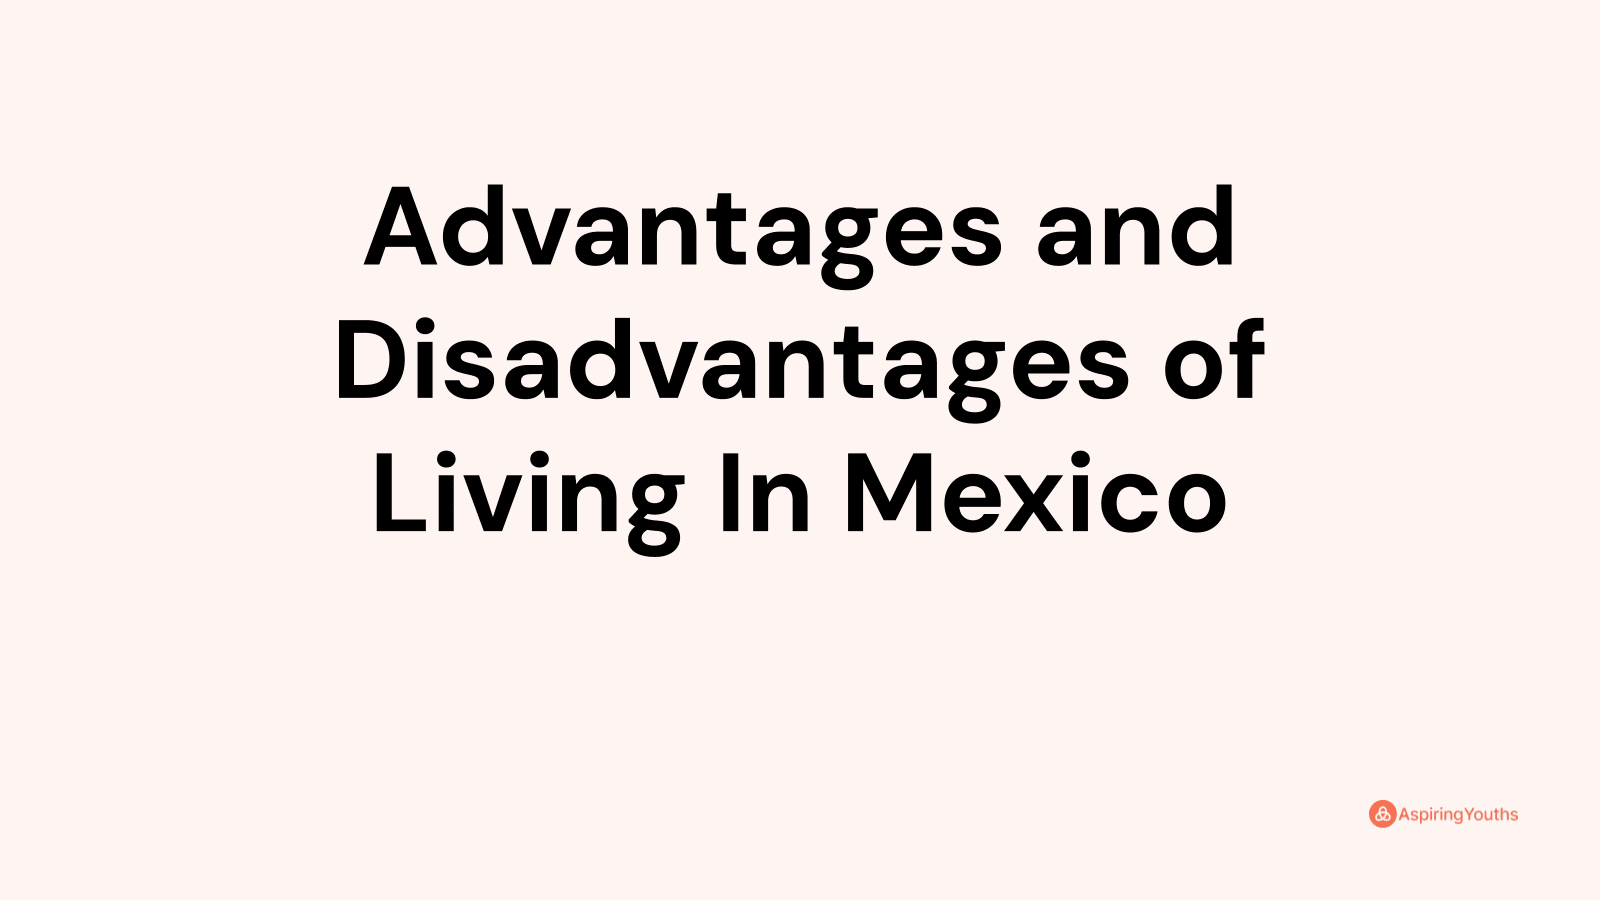 Advantages and disadvantages of Living In Mexico